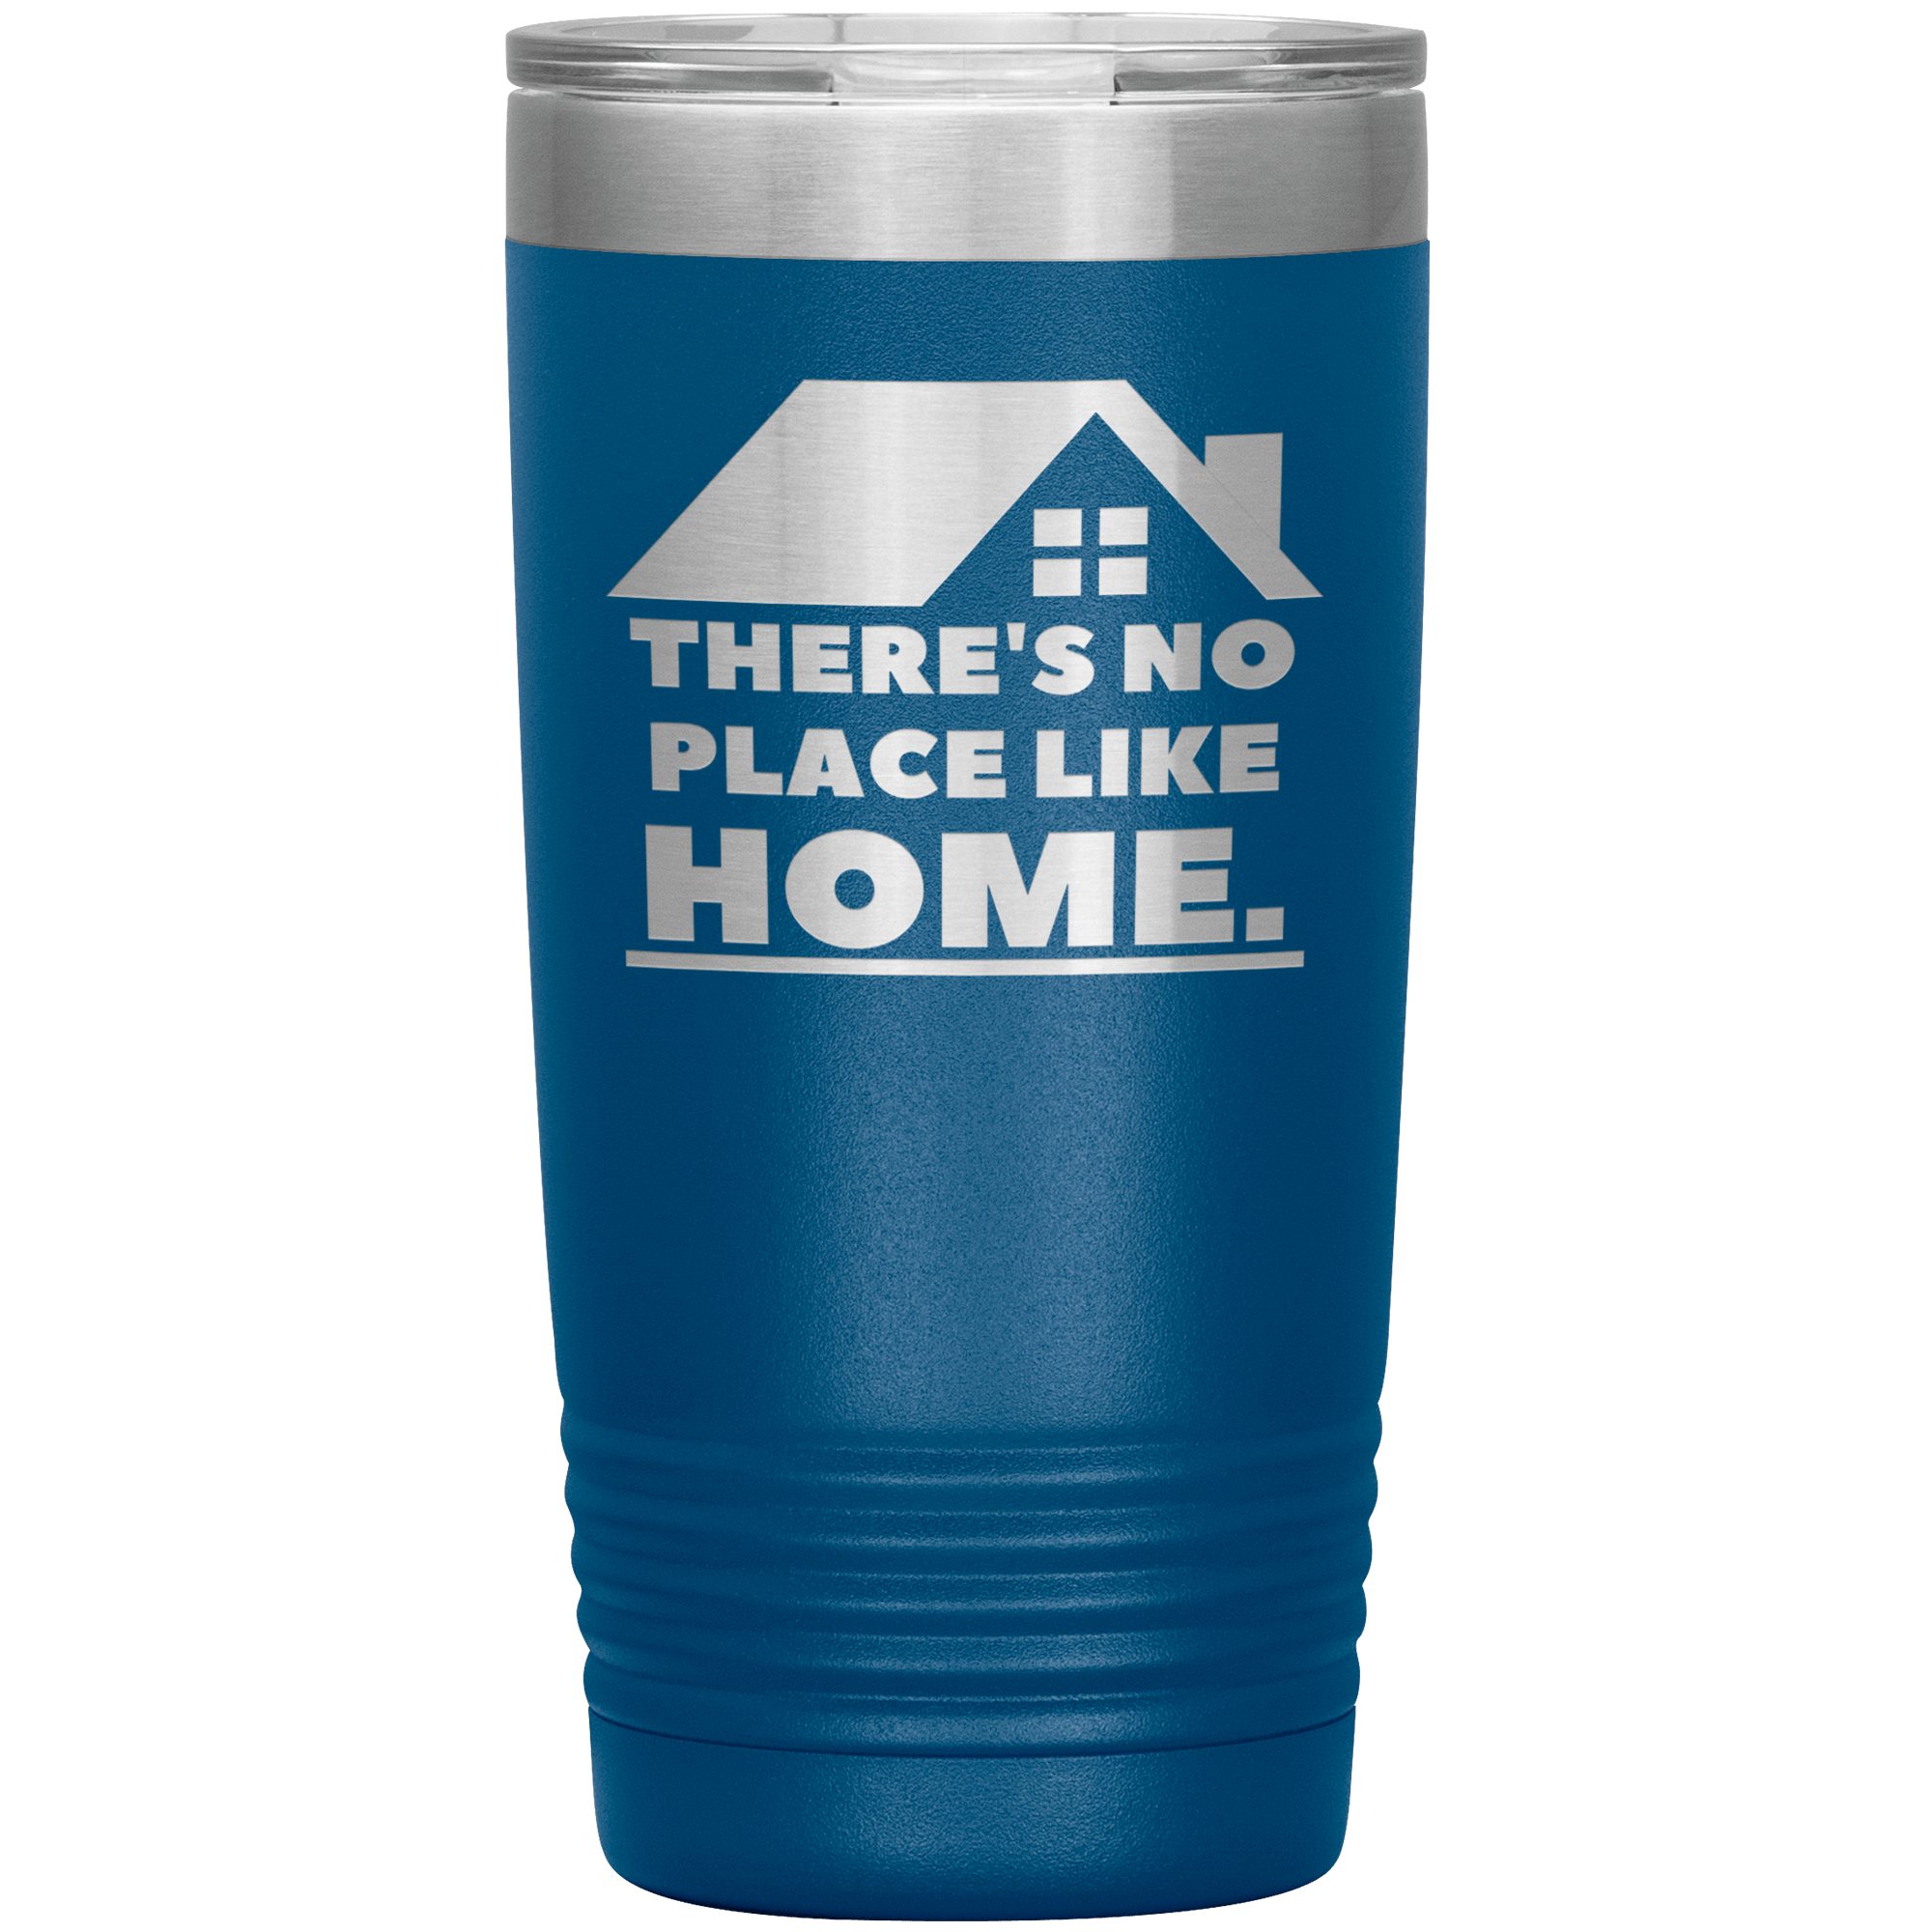 "THERE'S NO PLACE LIKE HOME" Tumbler.